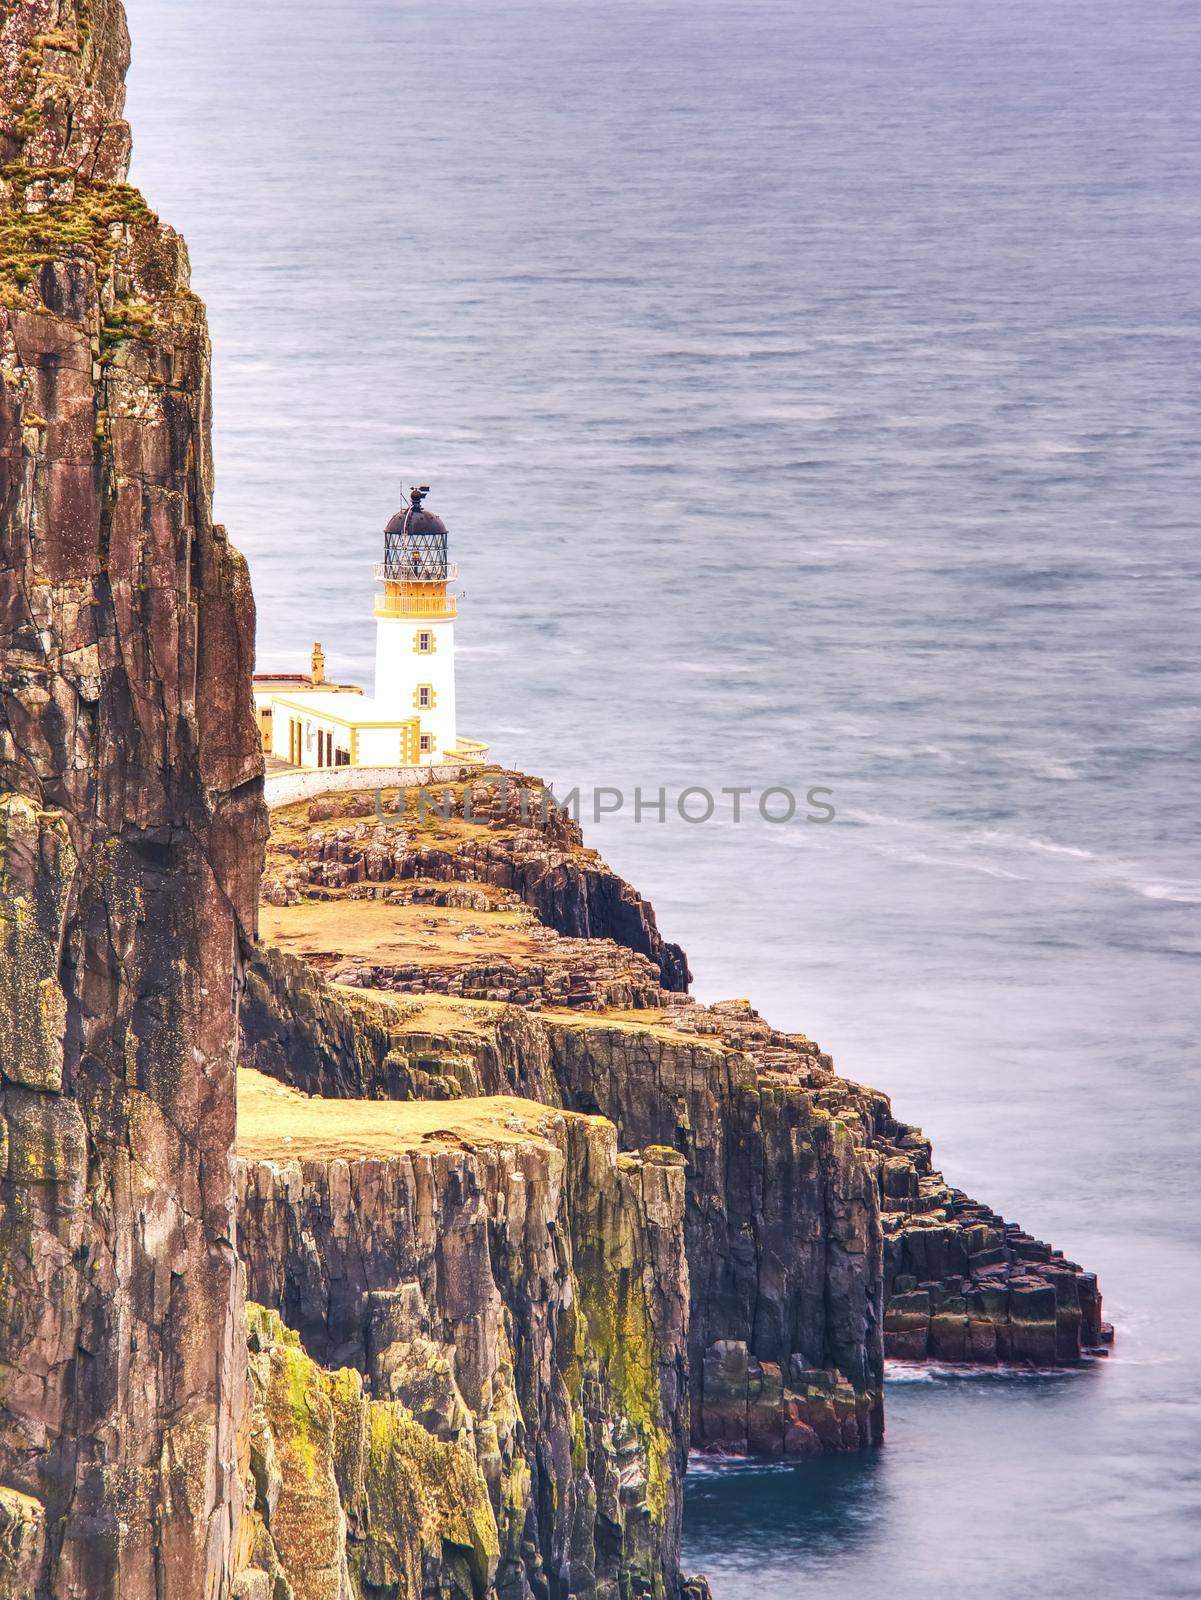 Neist Point peninsula with lighthouse is a very photographed place by rdonar2